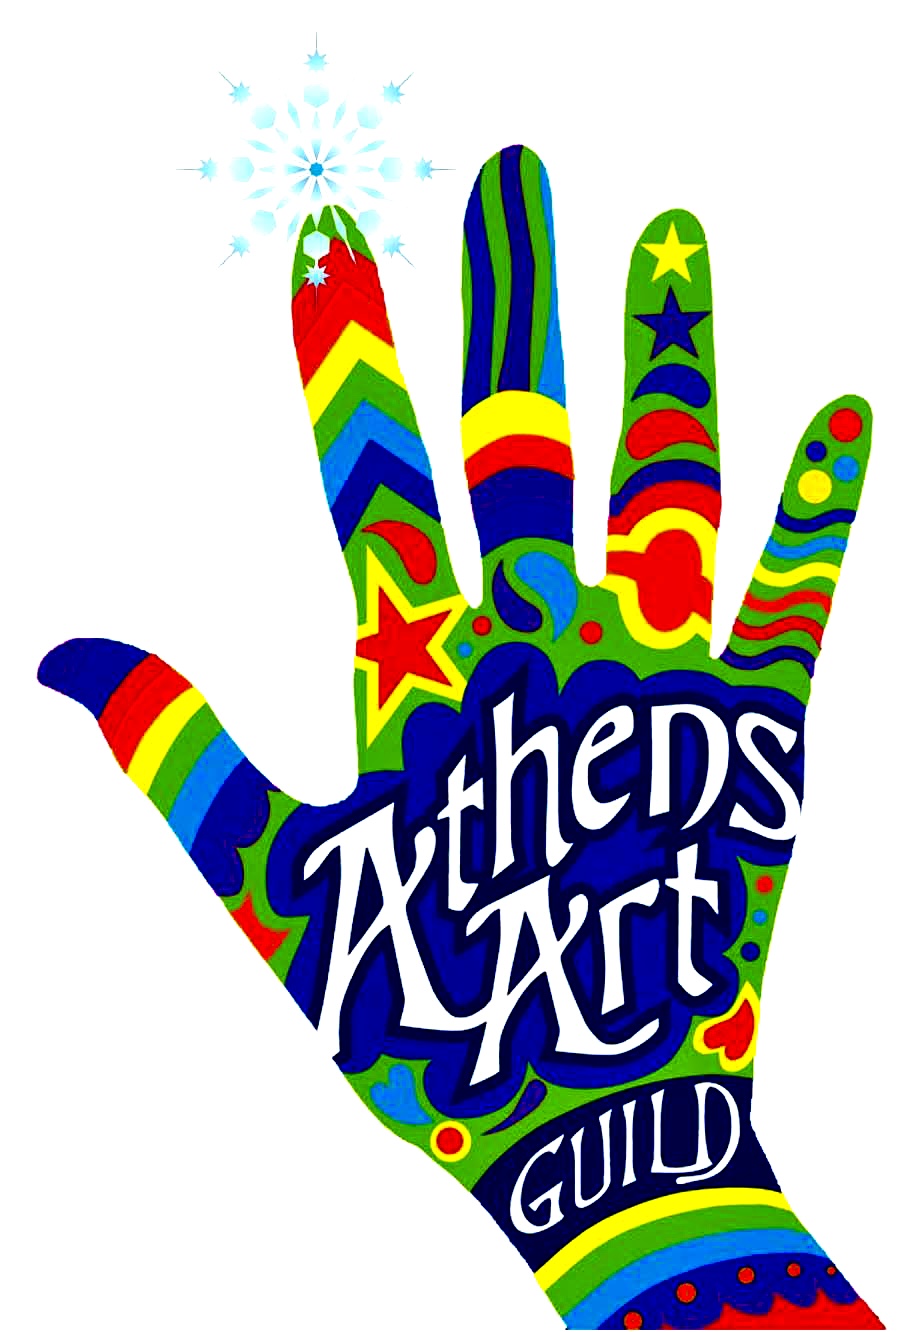 An image of the logo for the Athens Art Guild, which is the shape of a human hand with many colors and shapes in it.